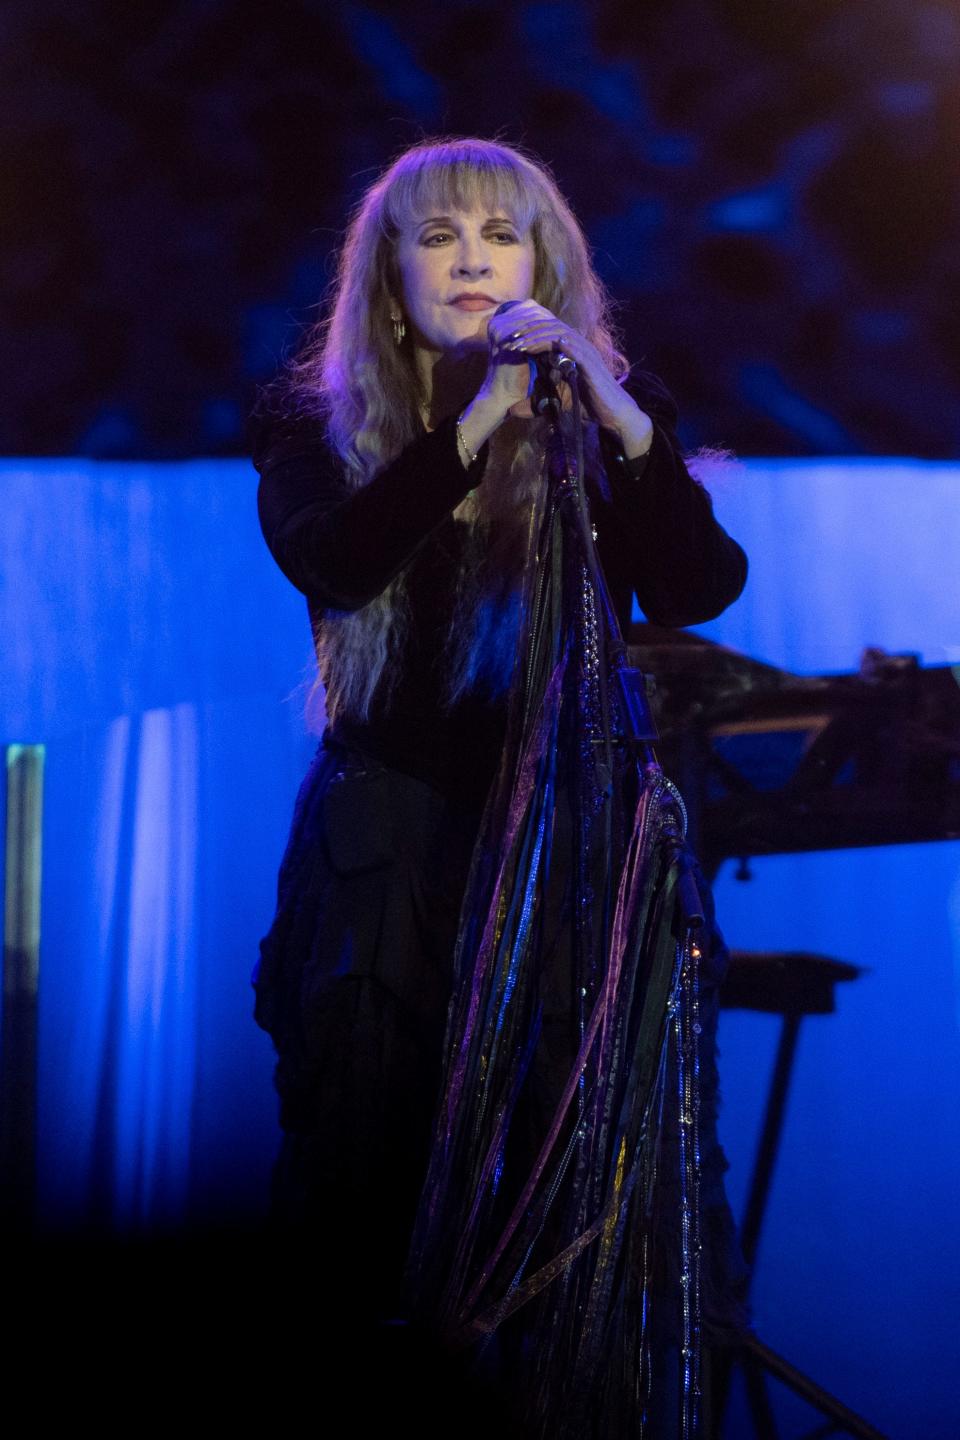 Legendary singer-songwriter Stevie Nicks has a career spanning four decades. She'll perform in Knoxville this May.